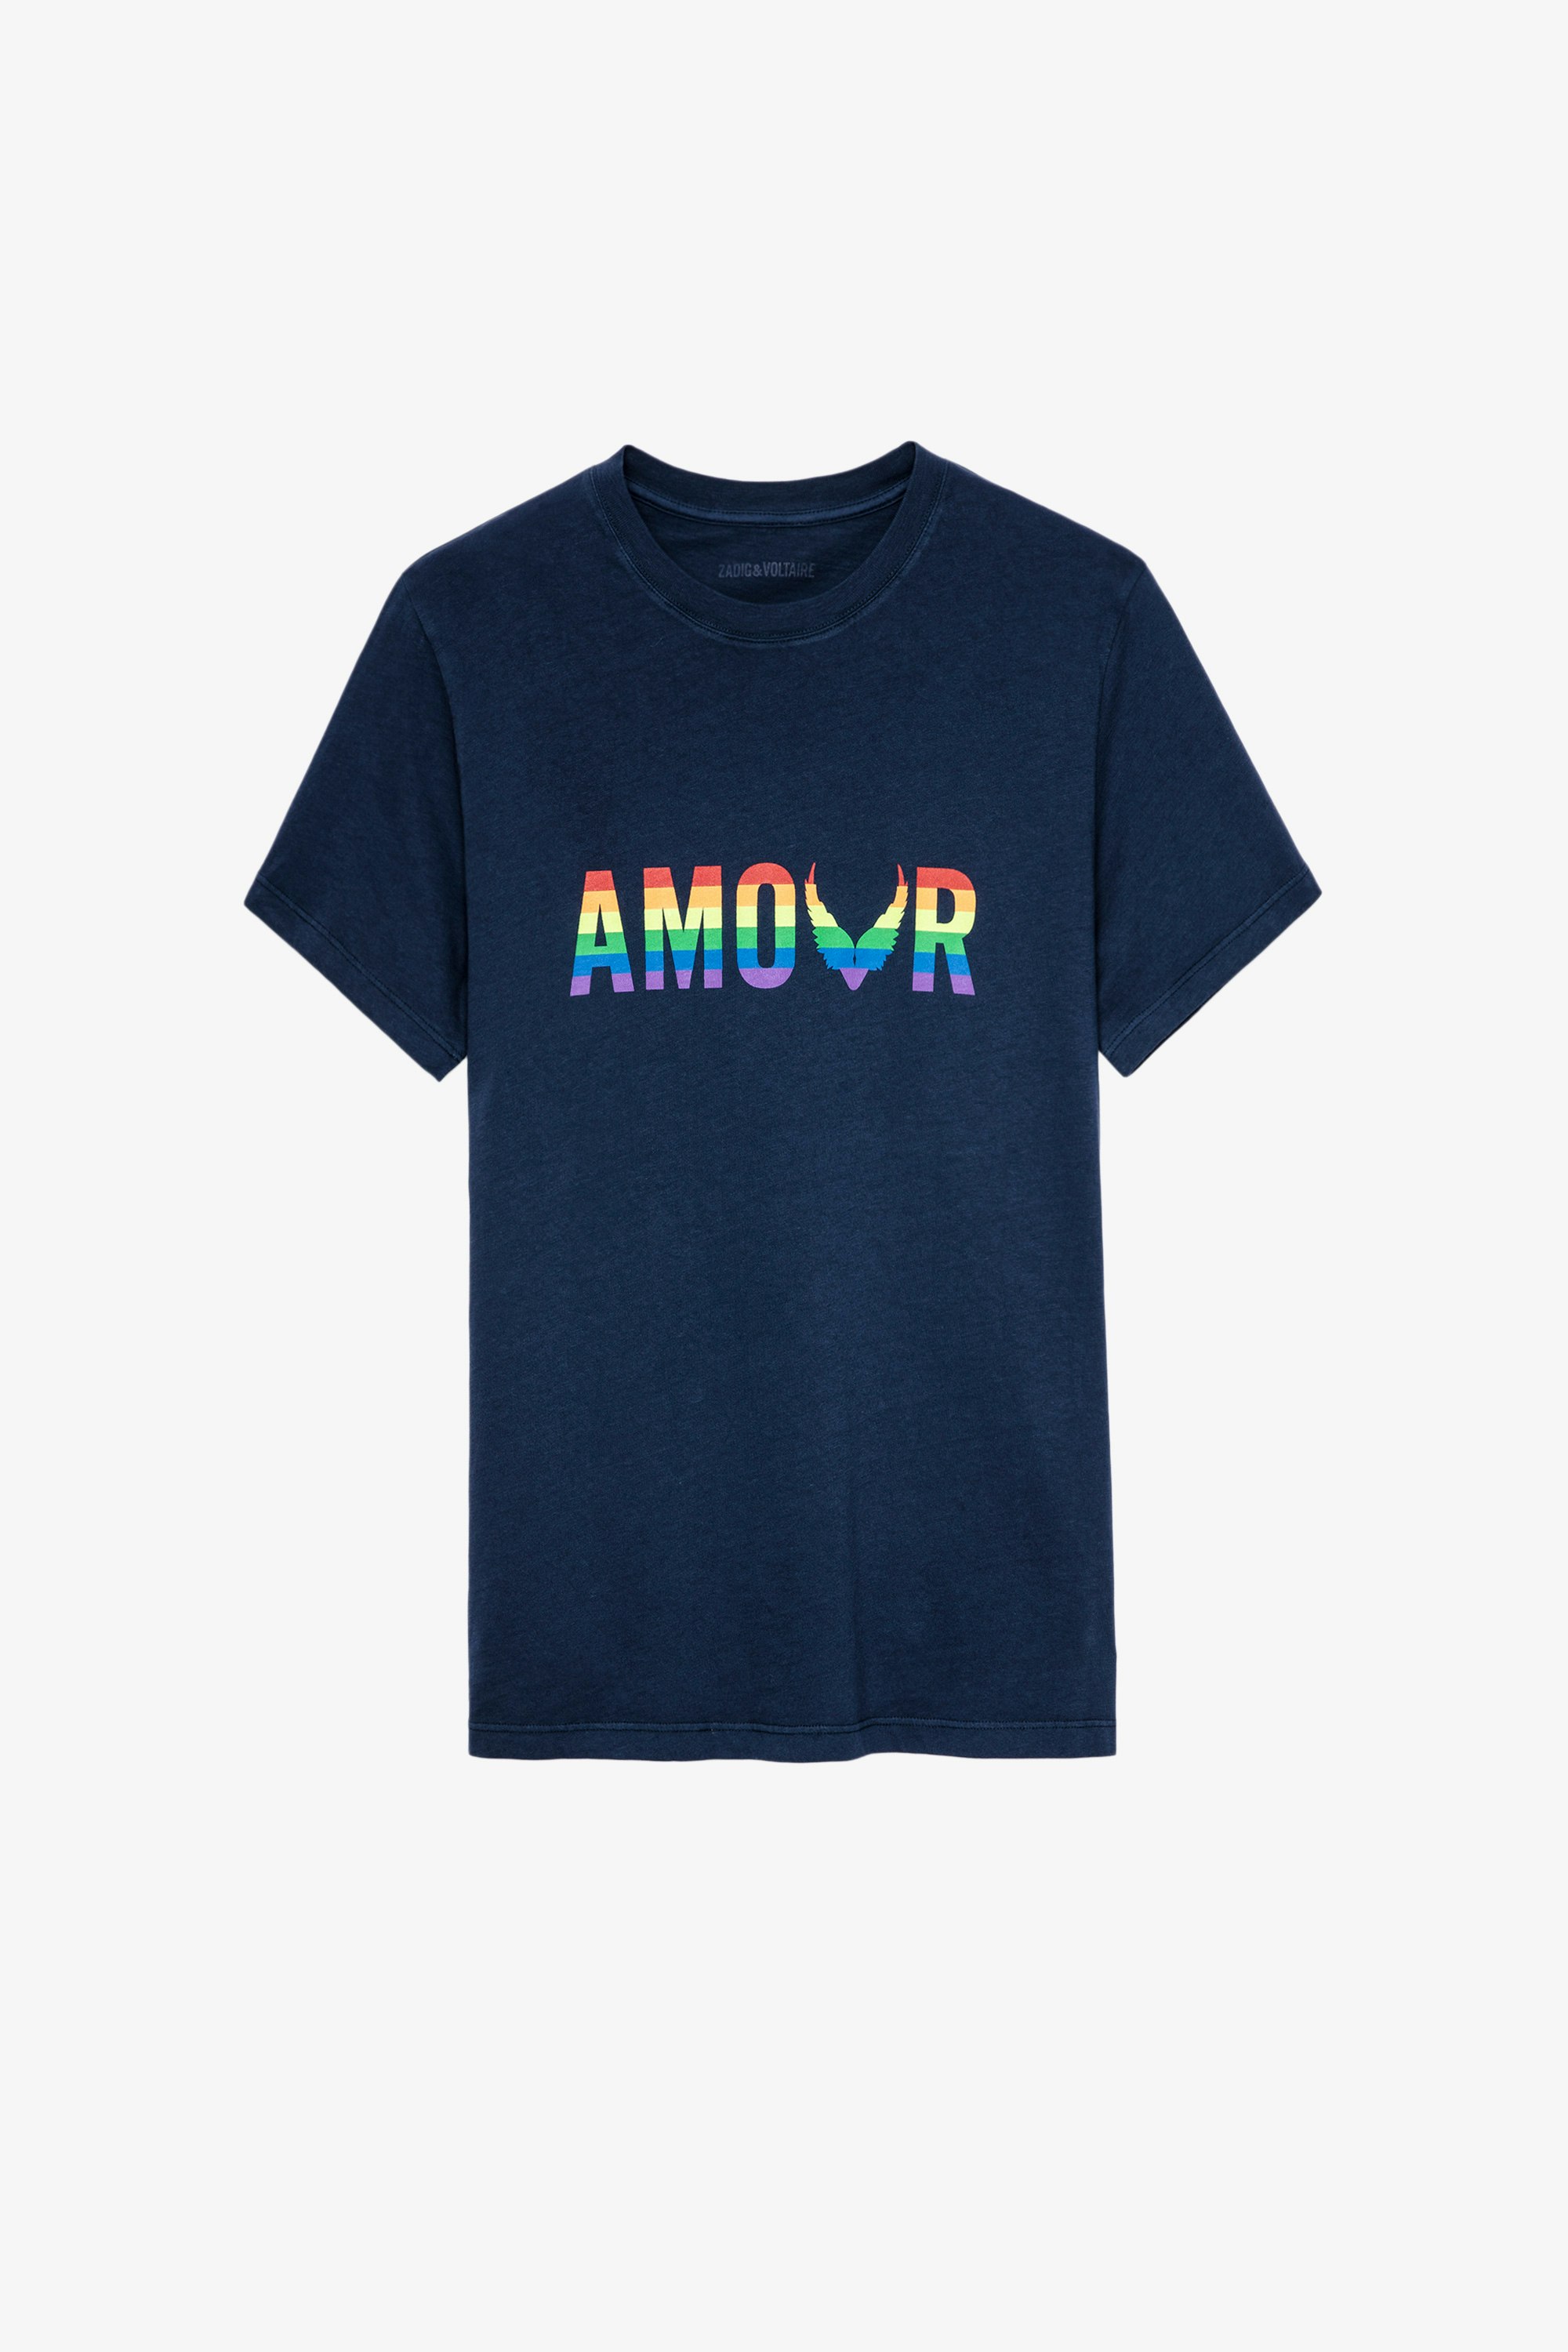 T-shirt Tommy Amour Wings T-shirt in cotone blu navy con stampa Amour multicolore da donna